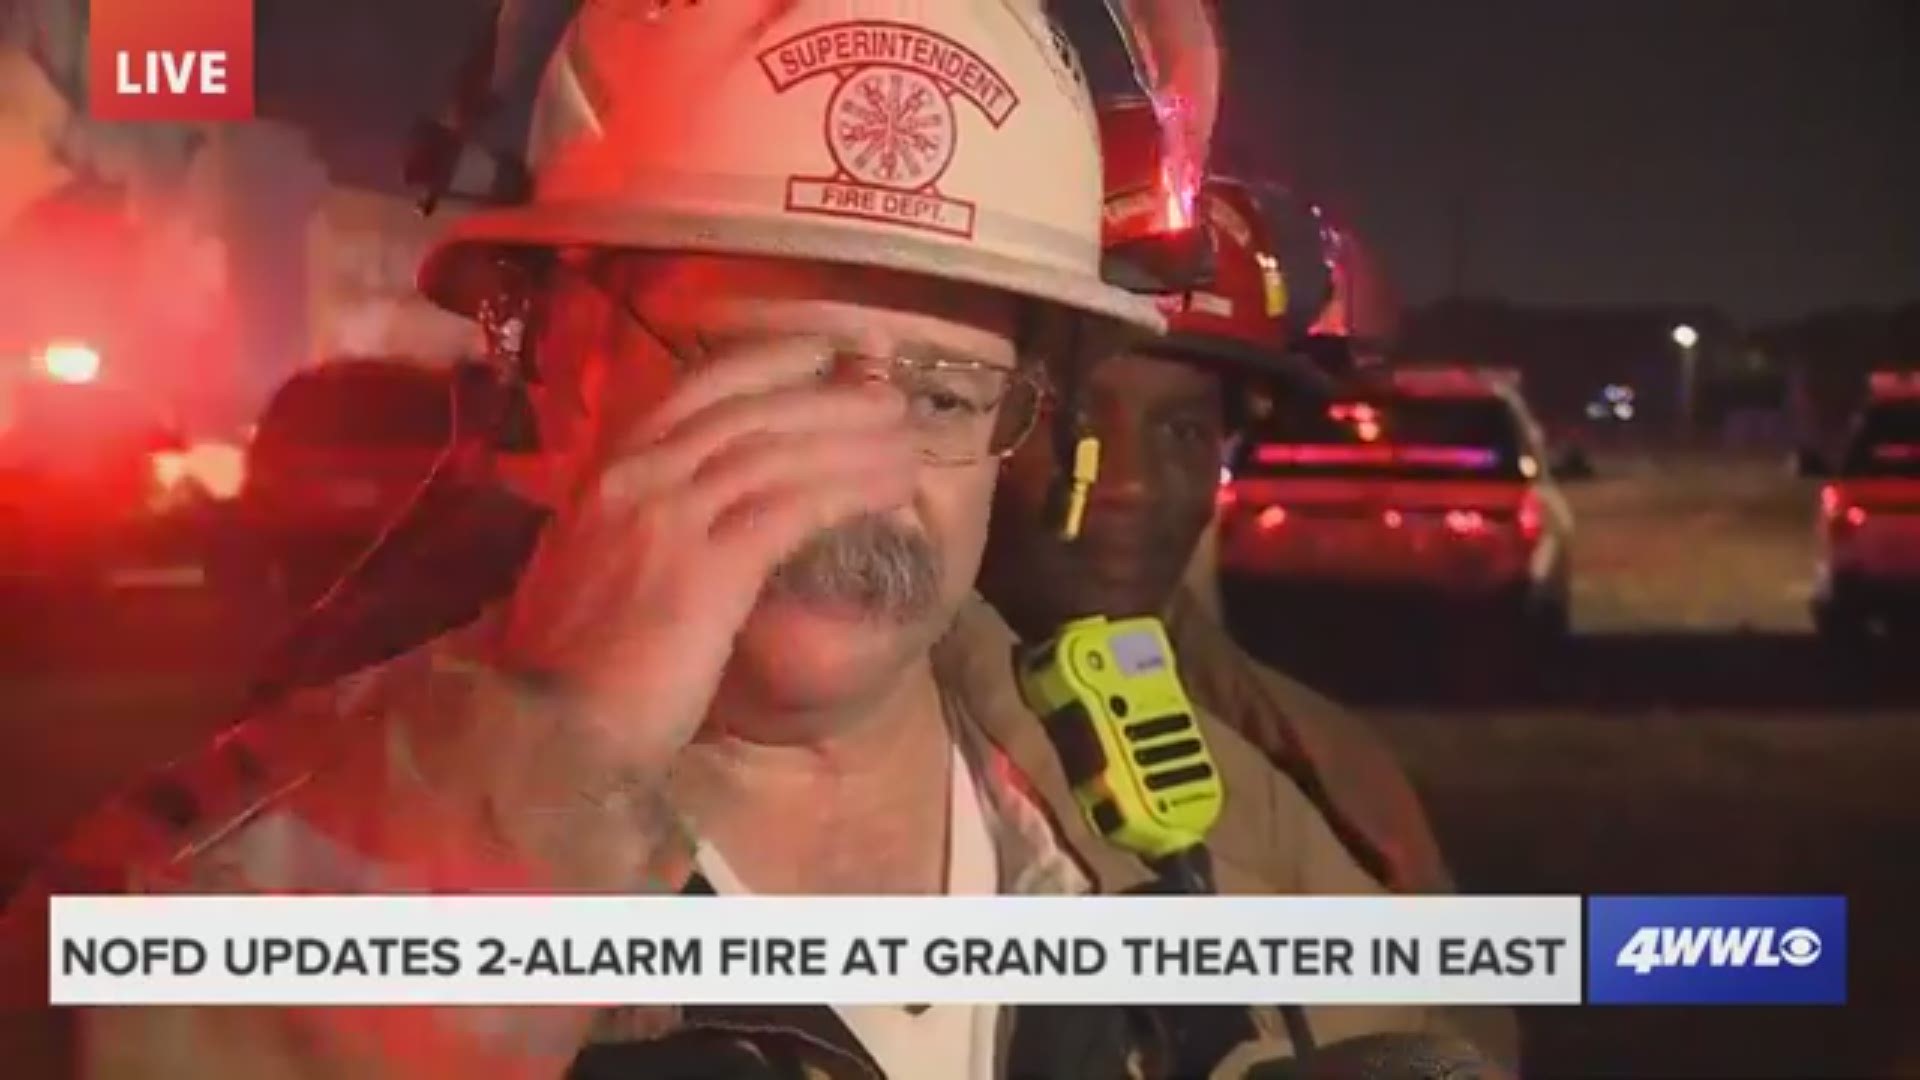 Firefighters contained the 2-alarm fire that caused the roof of the old Grand Theater to partially collapse late Friday night, NOFD officials said.